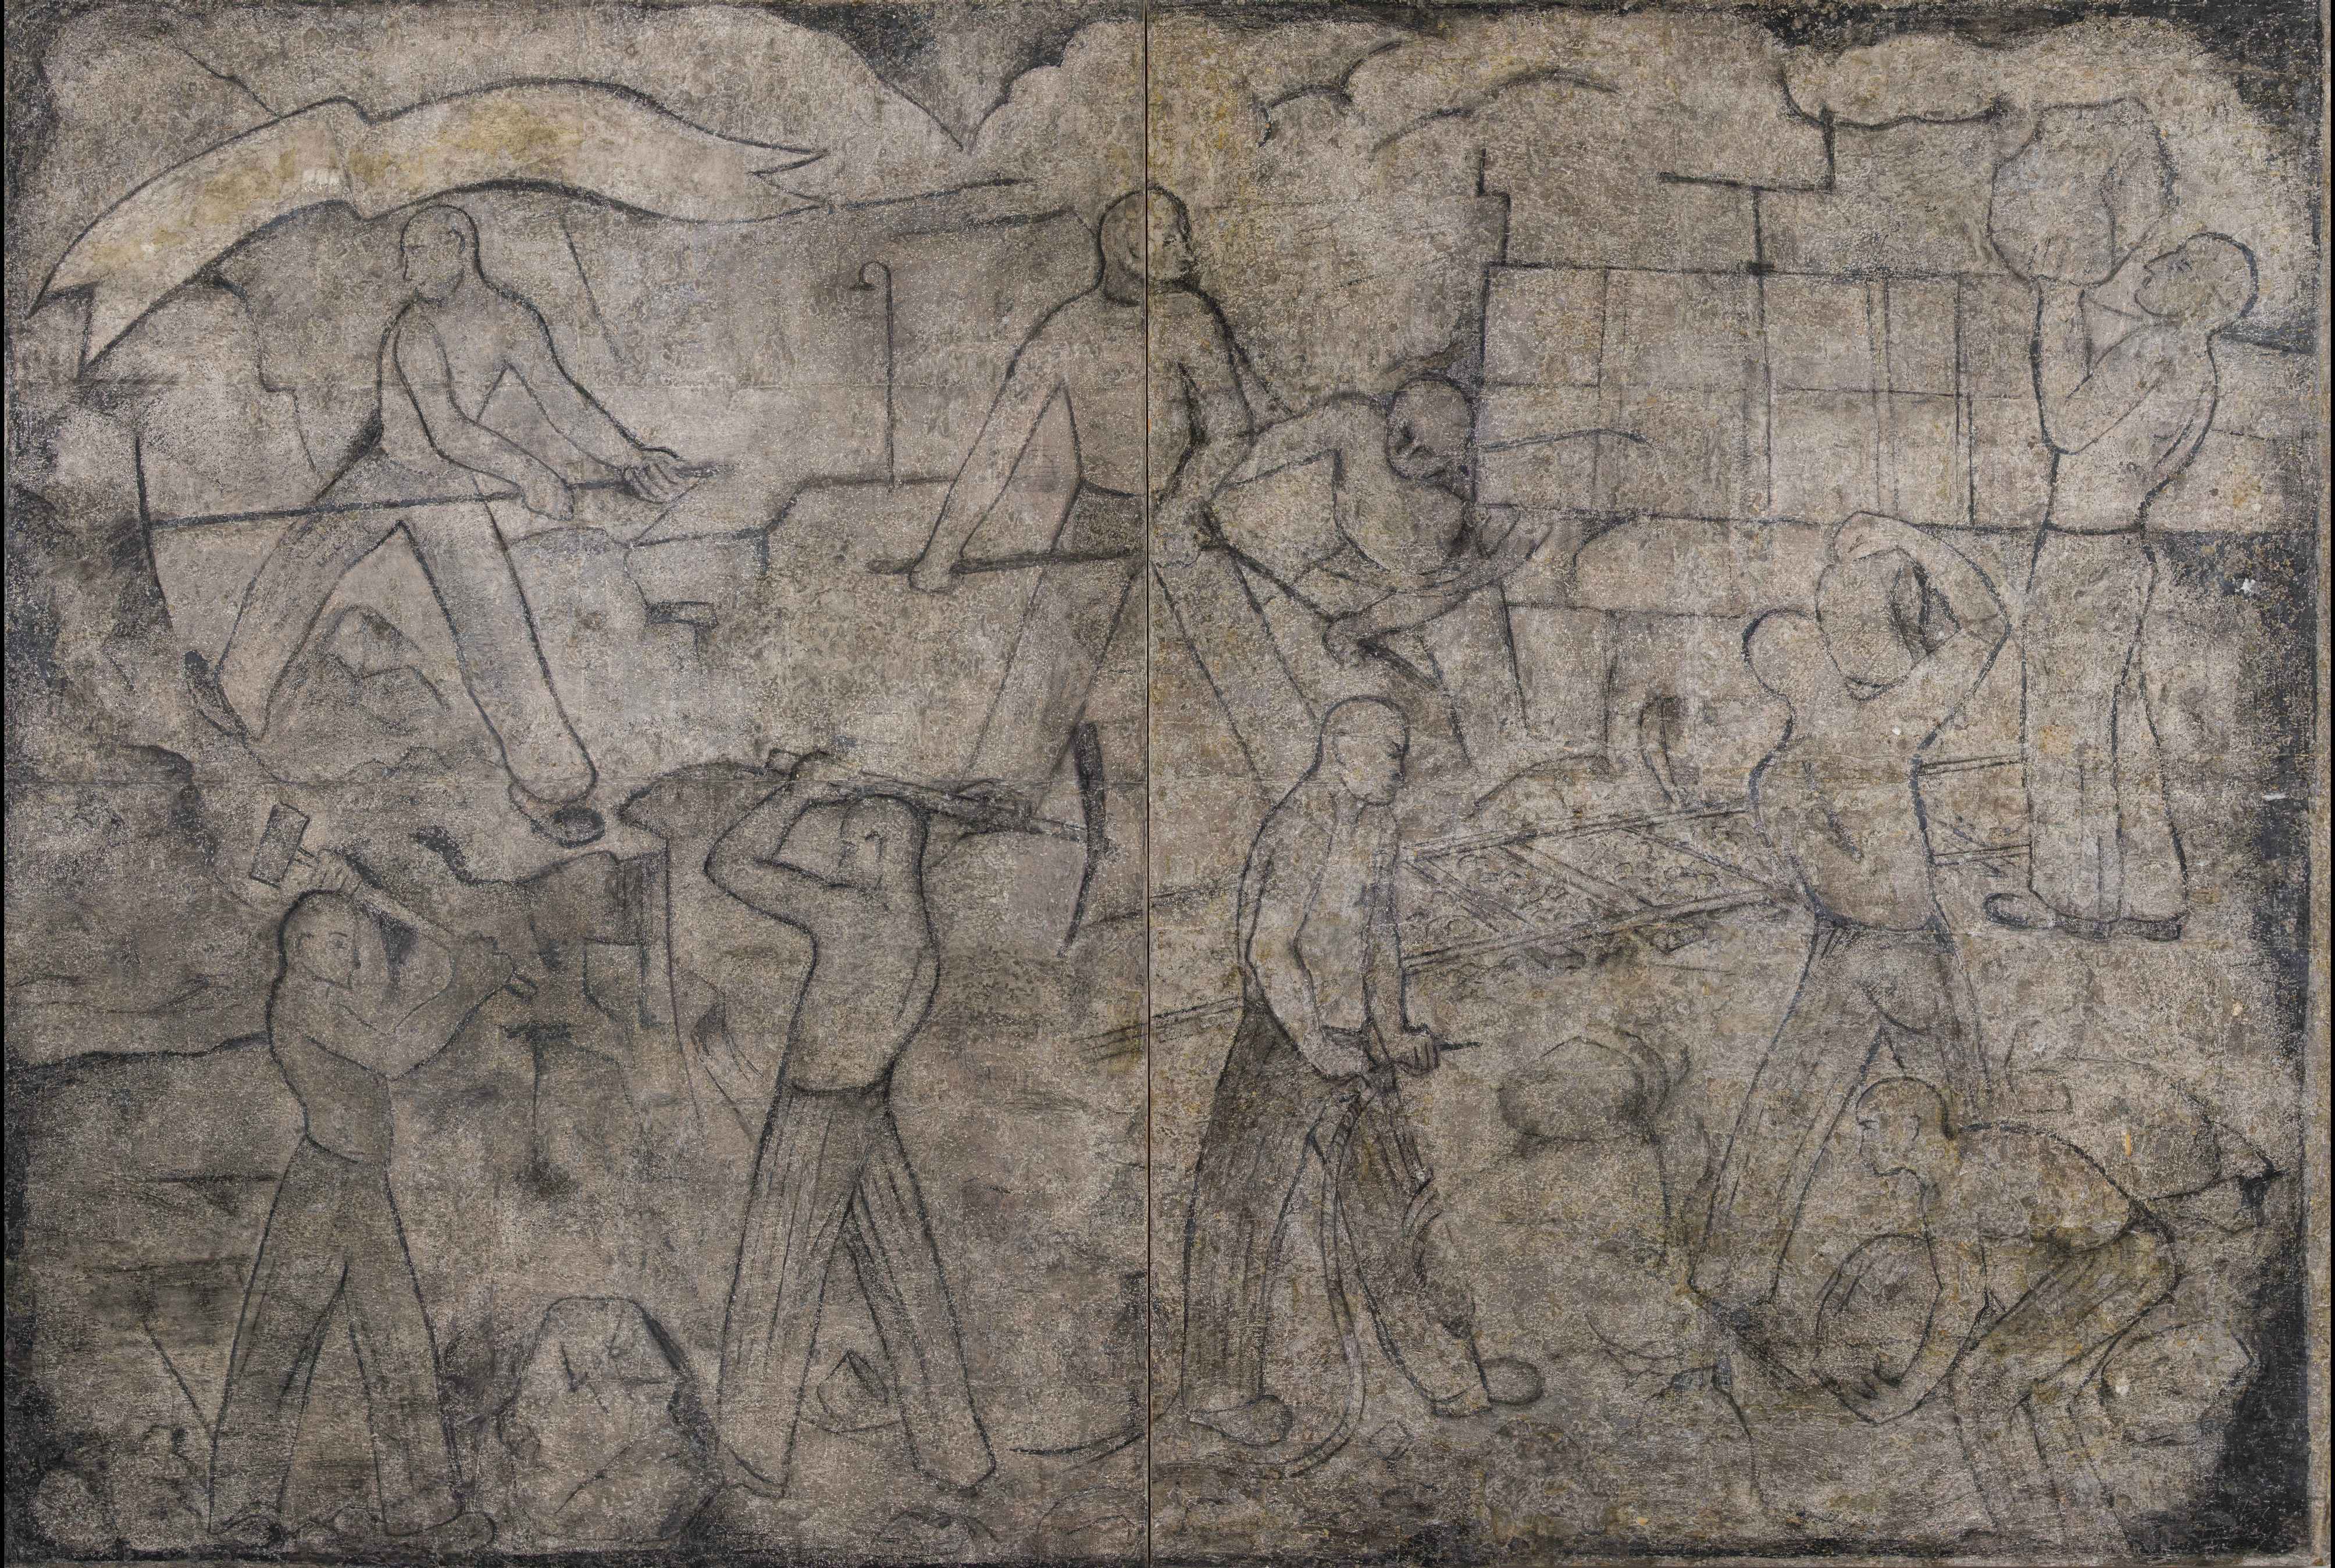 Plaster painting. A group of prisoners working at quarrying and moving large blocks of stone. They work with pickaxes and hammers in their hands. Dressed only in striped trousers. One of the prisoners places a stone on the wall laid behind.